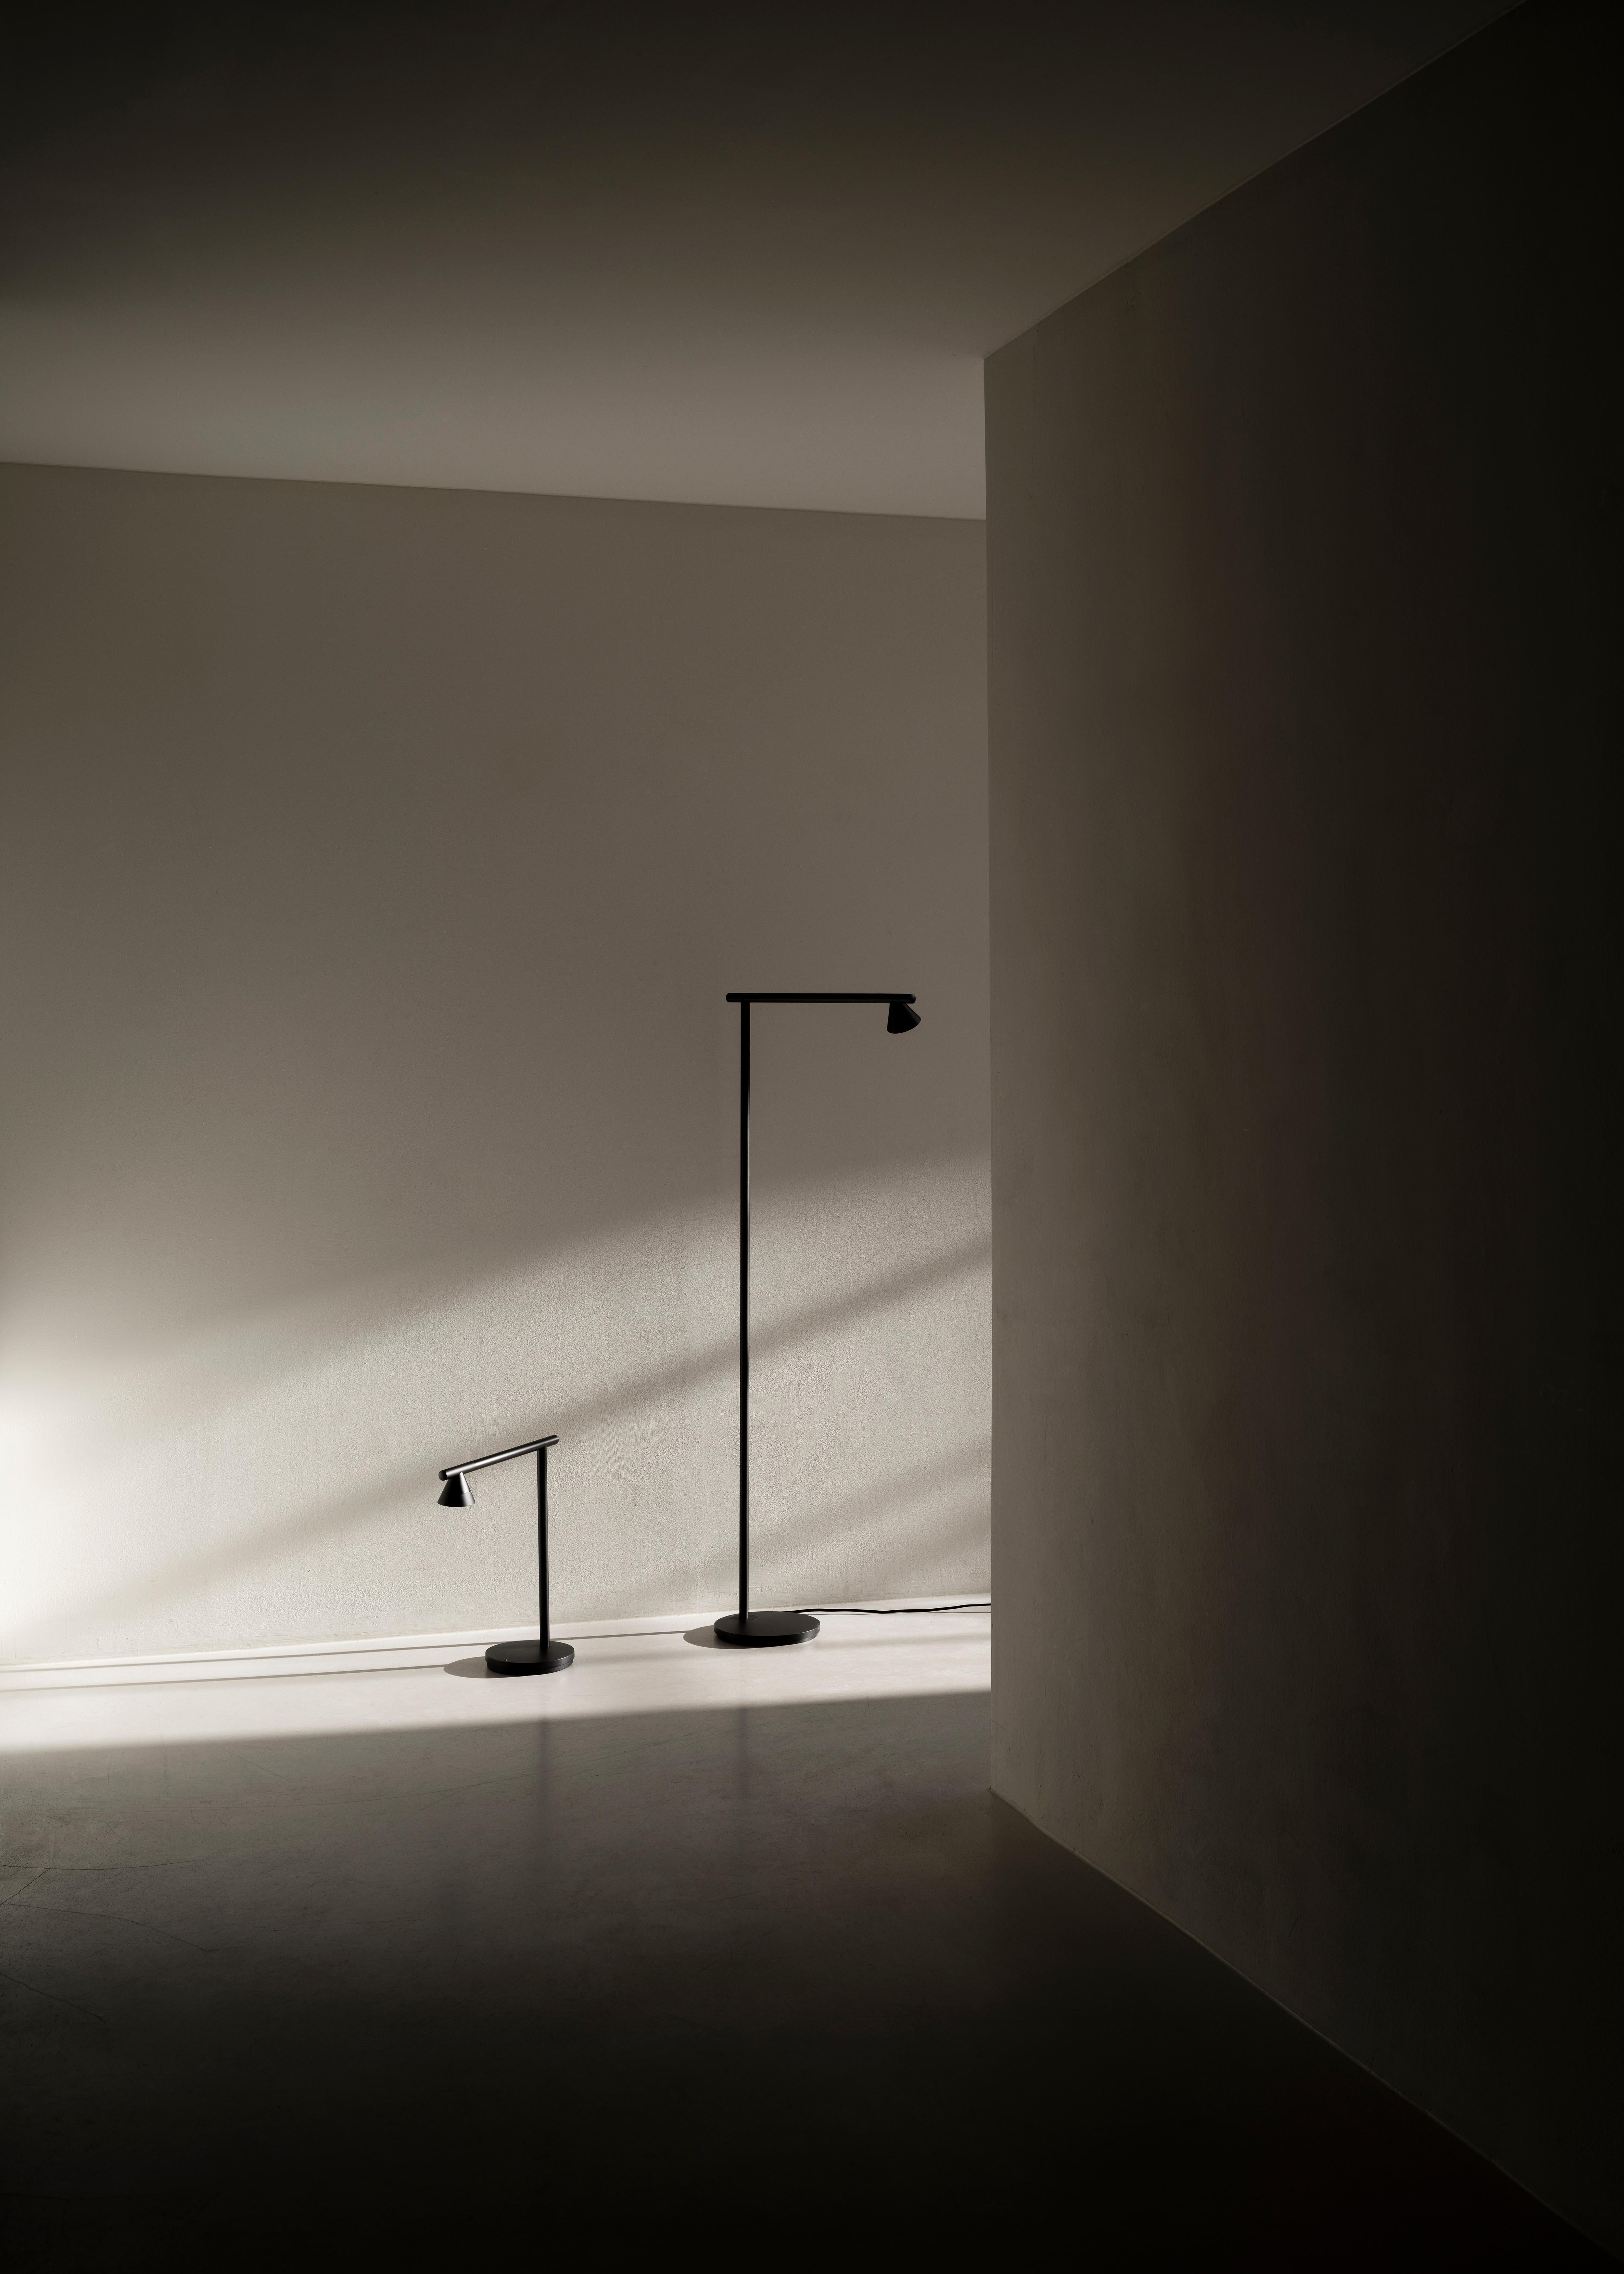 Probe floor lamp by AGO Lighting x BIg-Game

Material: Aluminum 
Light Source: Integrated LED (COB)
Watt. 4 W

Dimensions: H 122 cm x W 45 cm x D. 20 cm

AGO is a Korean design studio specialized in lighting. AGO is based in the area of